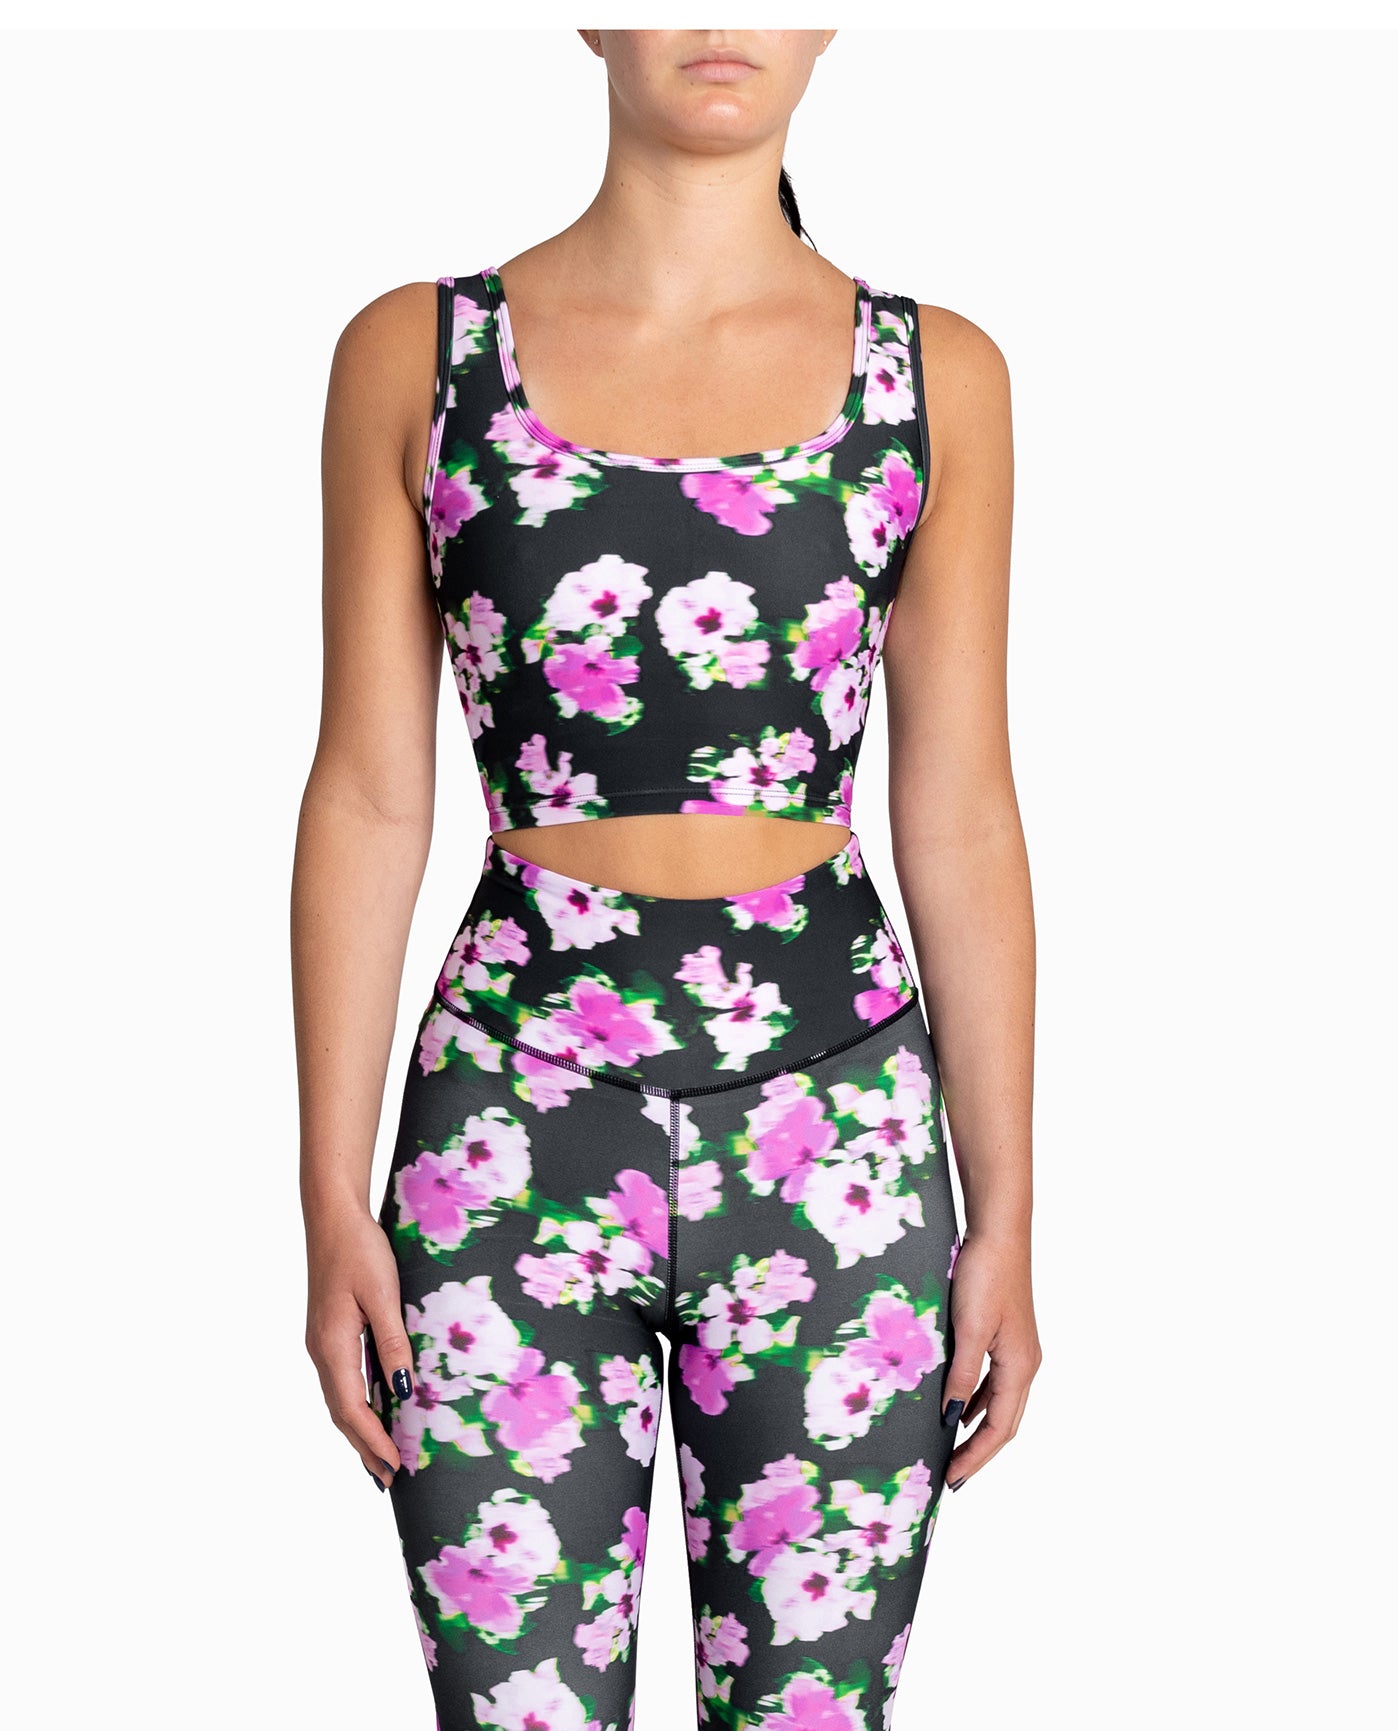 FRONT OF SPORTS BRA TOP | Pink and Black Floral